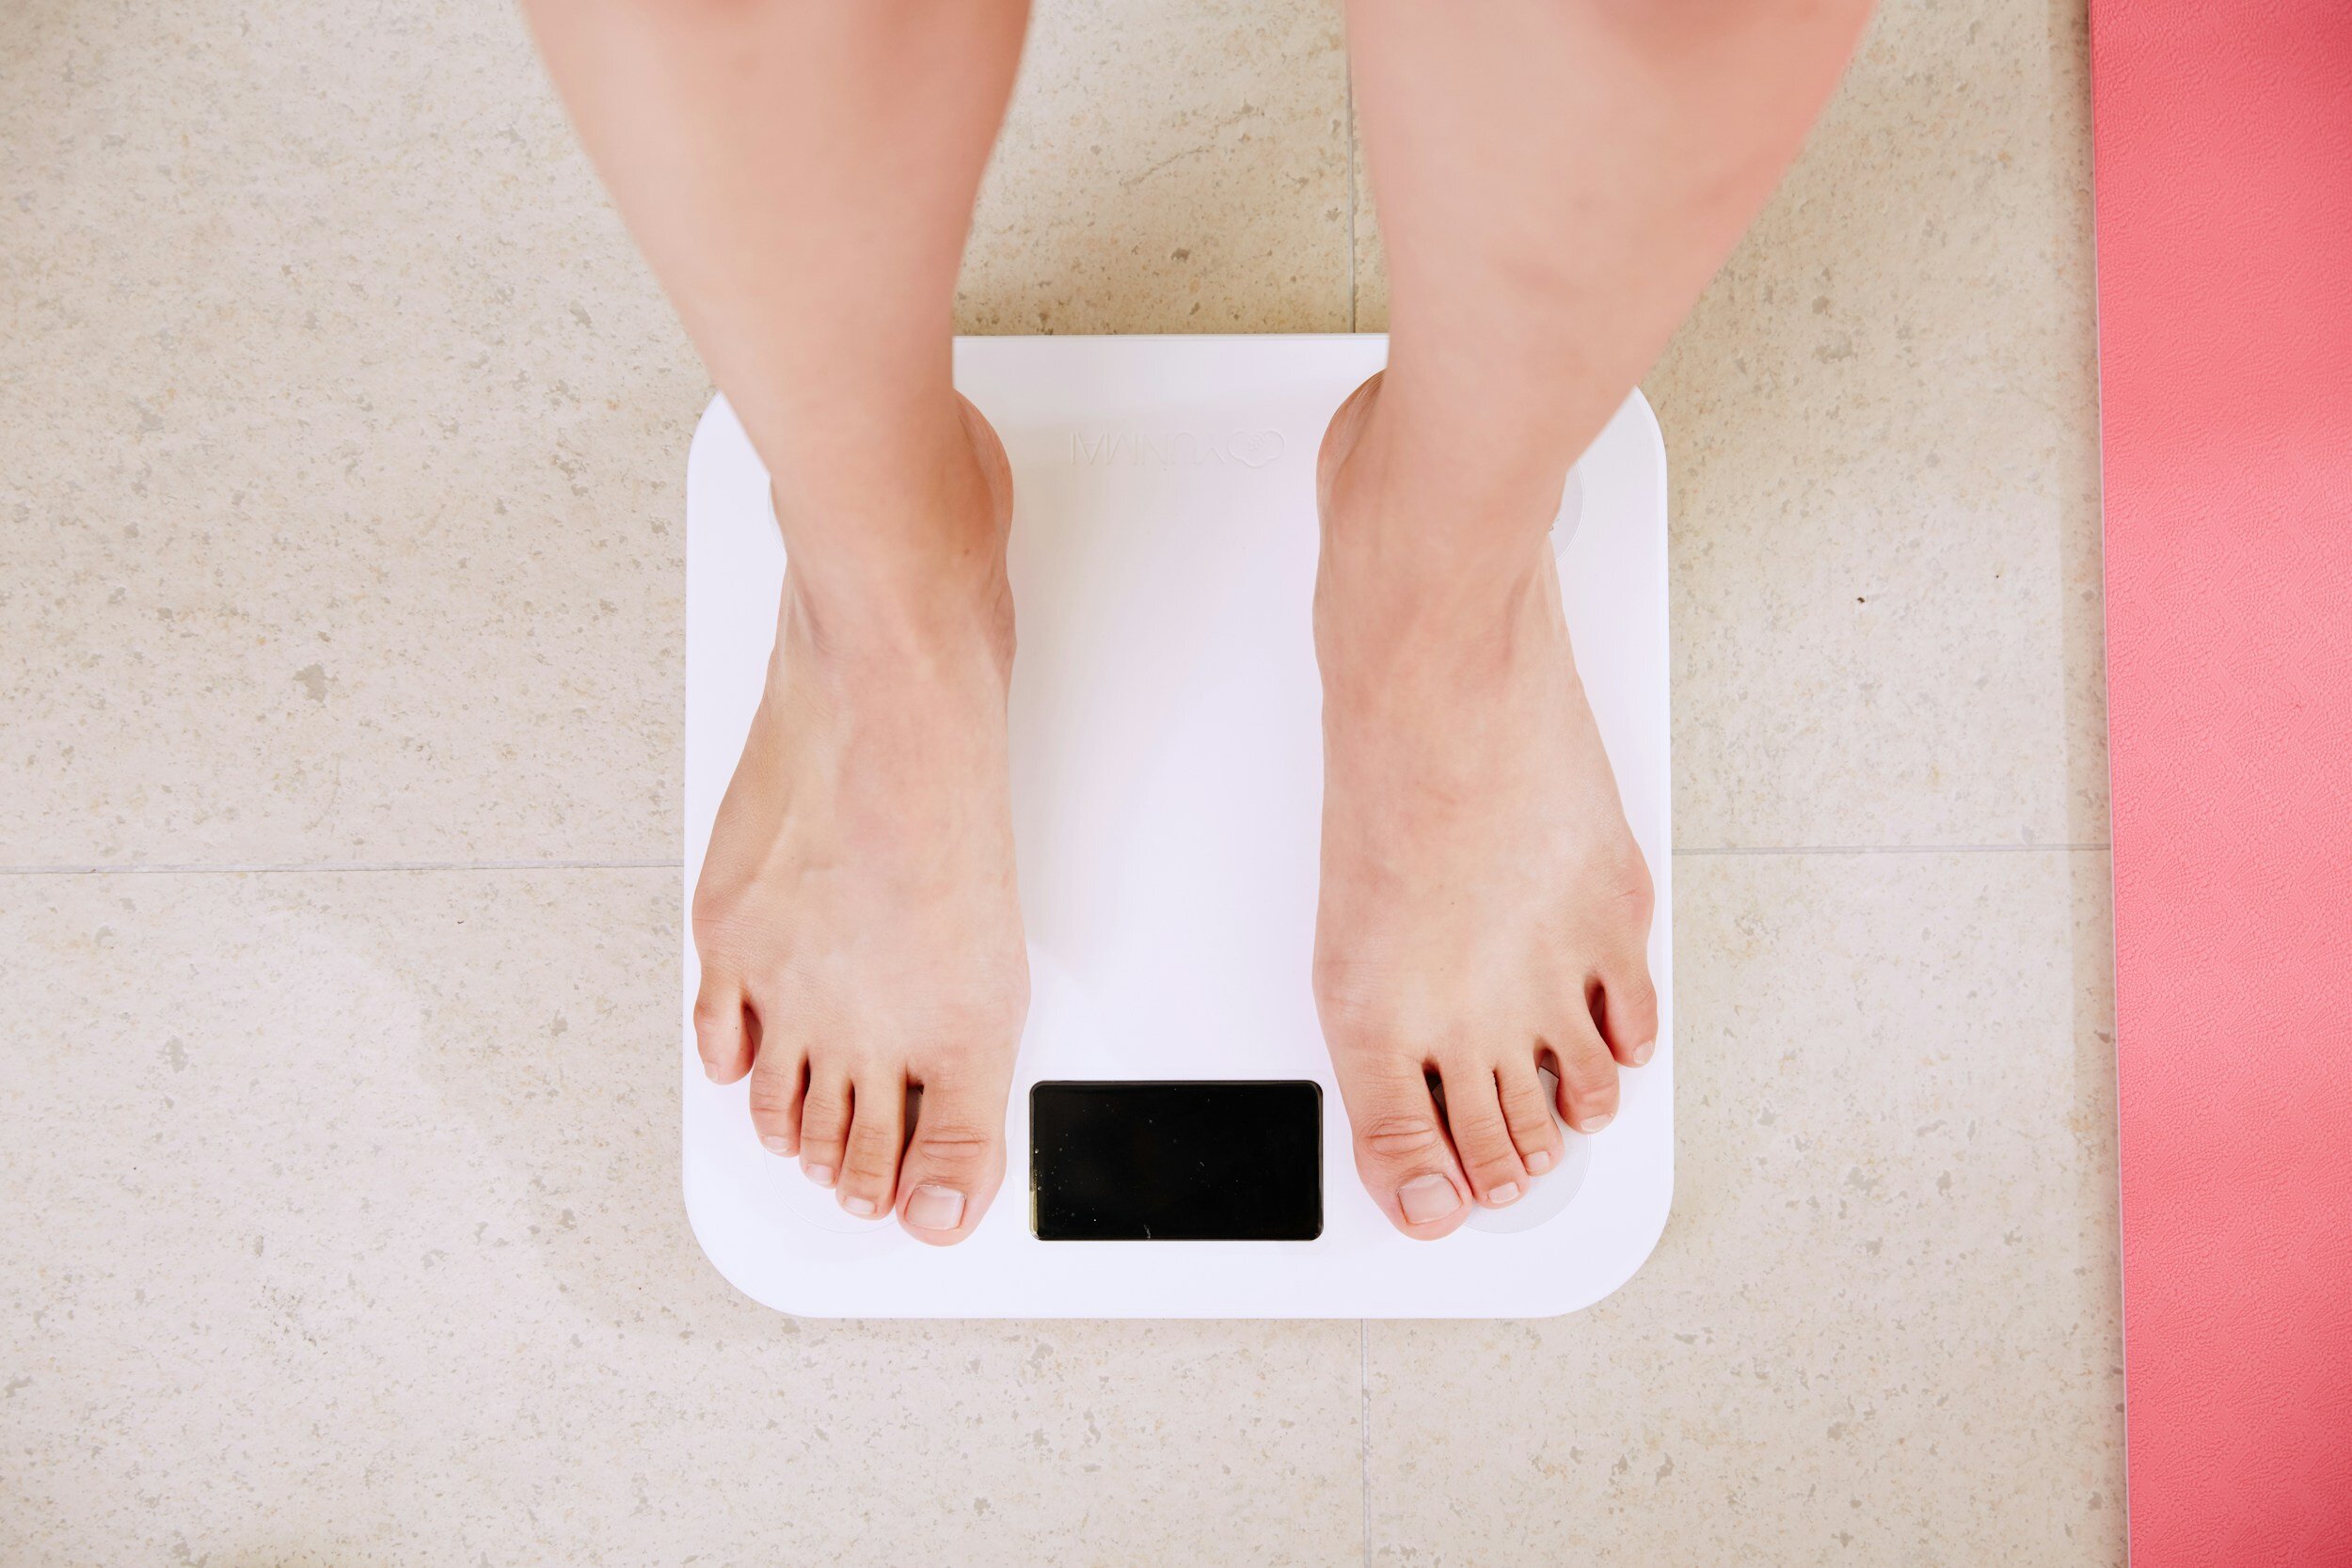 The Impact of Obesity on Venous Disease